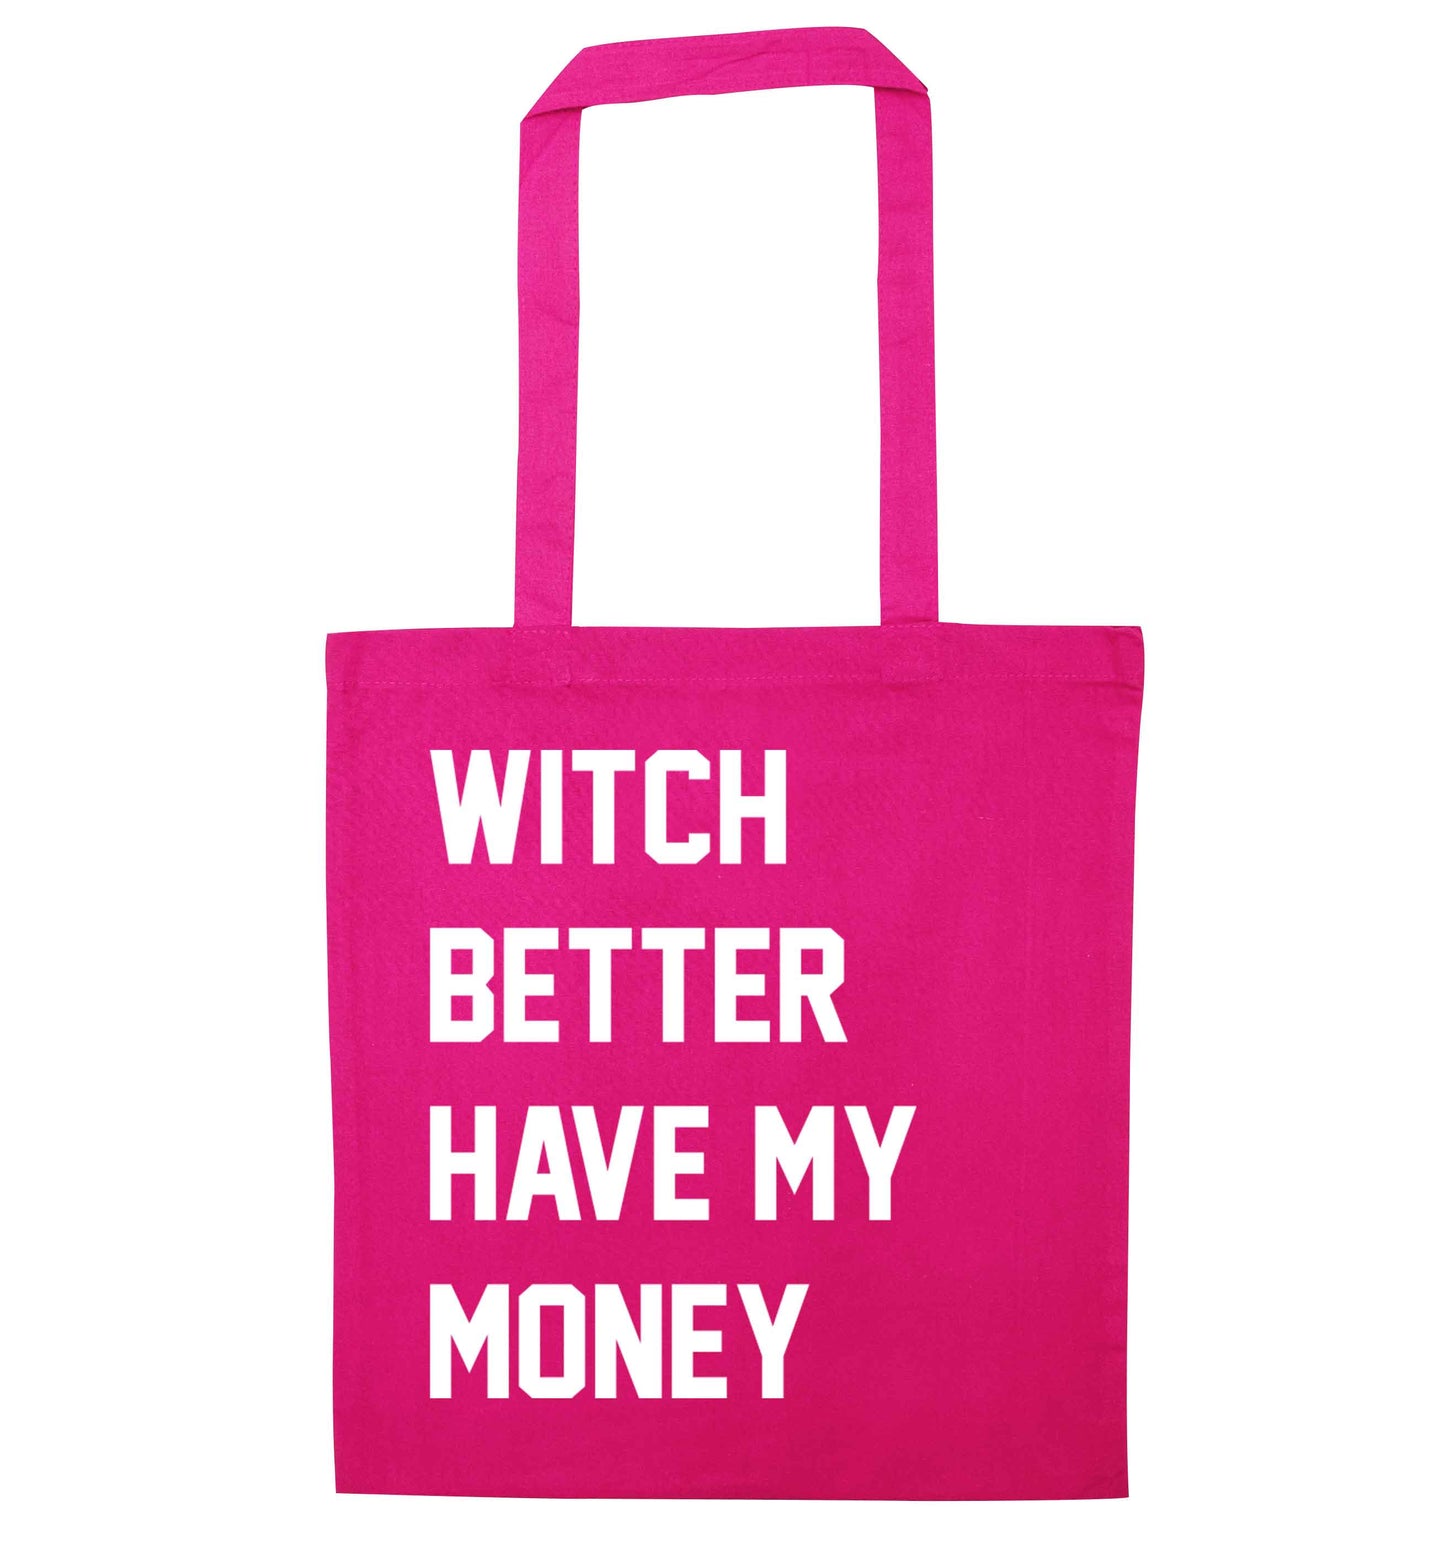 Witch better have my money pink tote bag